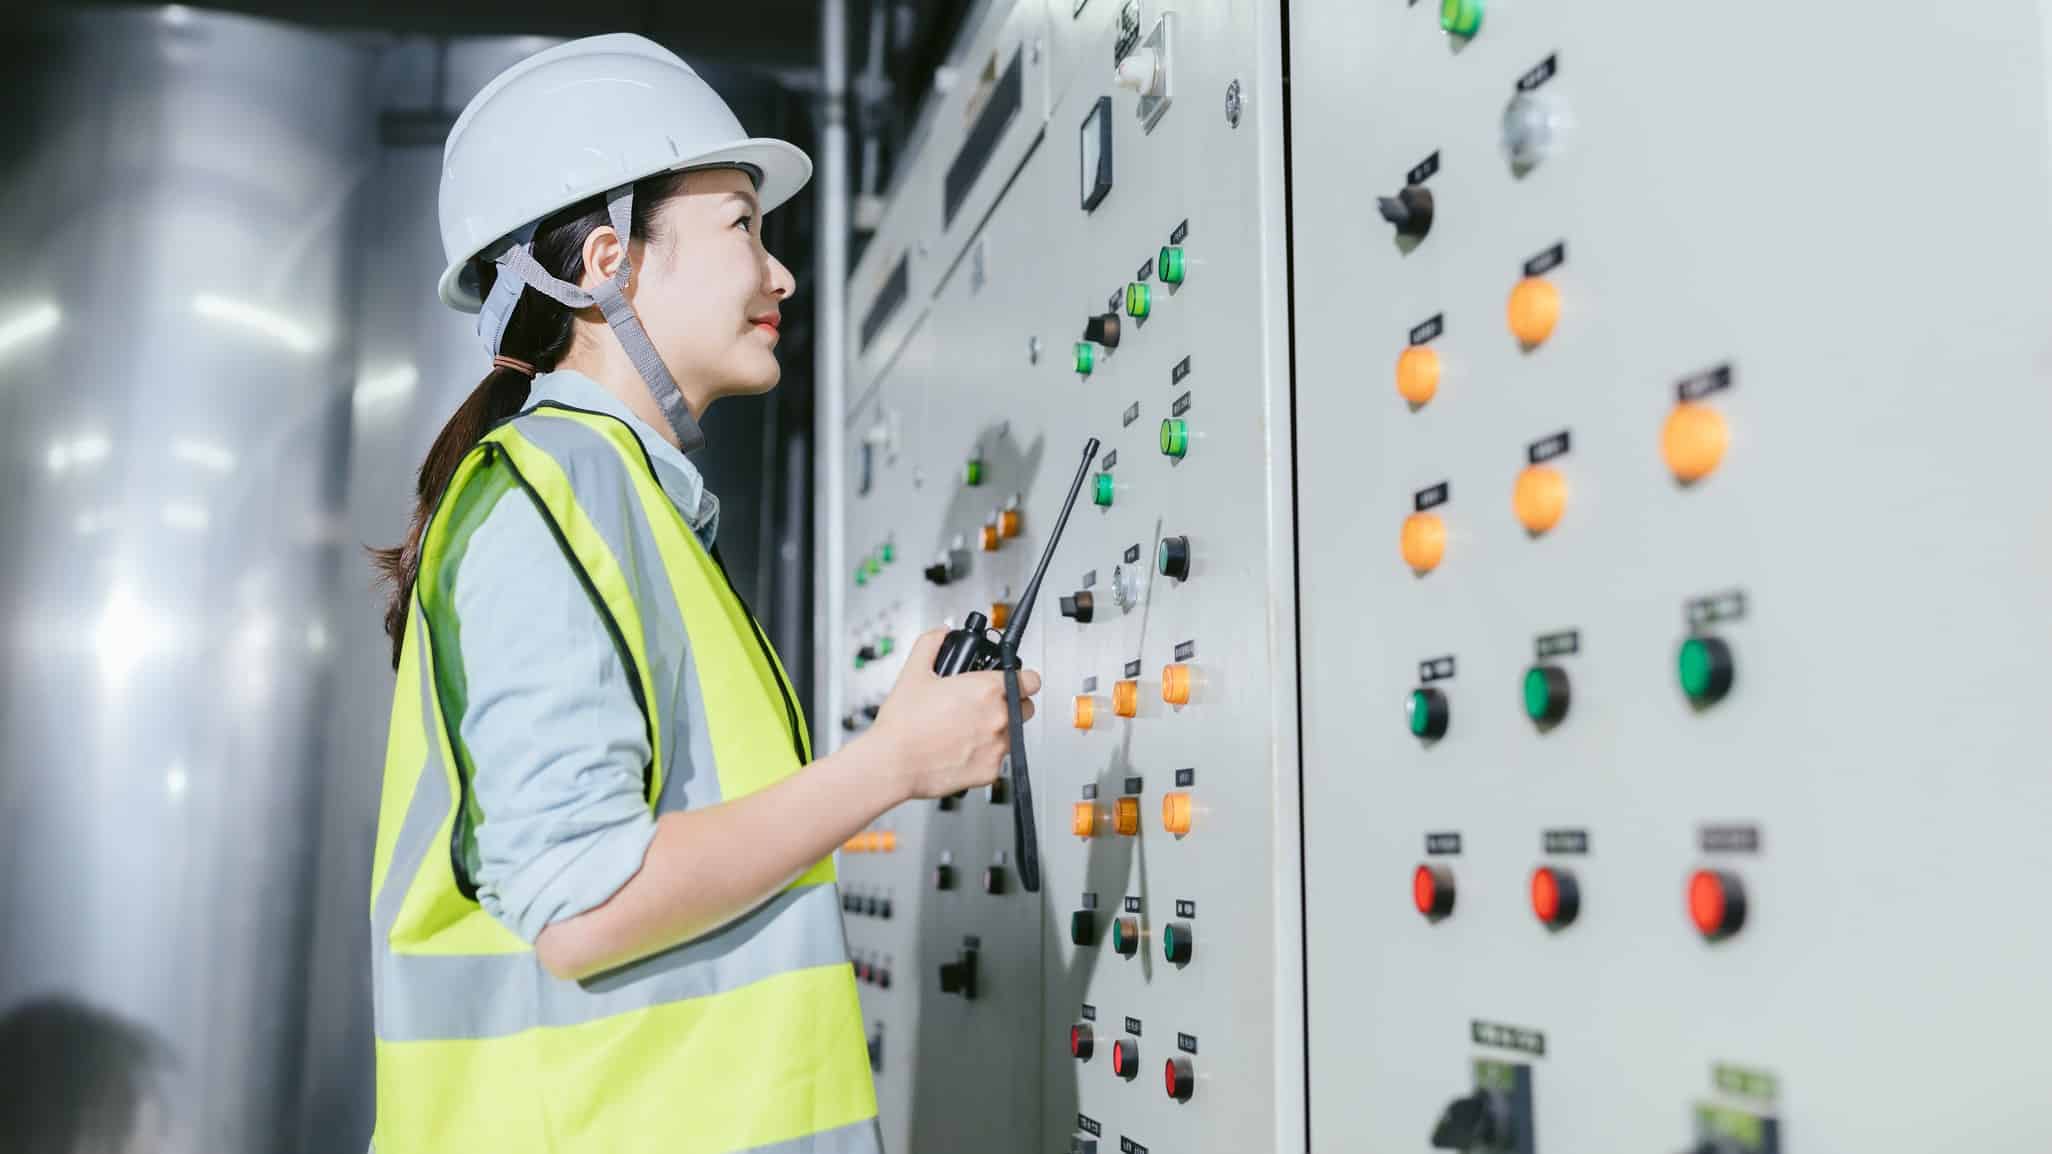 Female power plant worker looks at switchboard